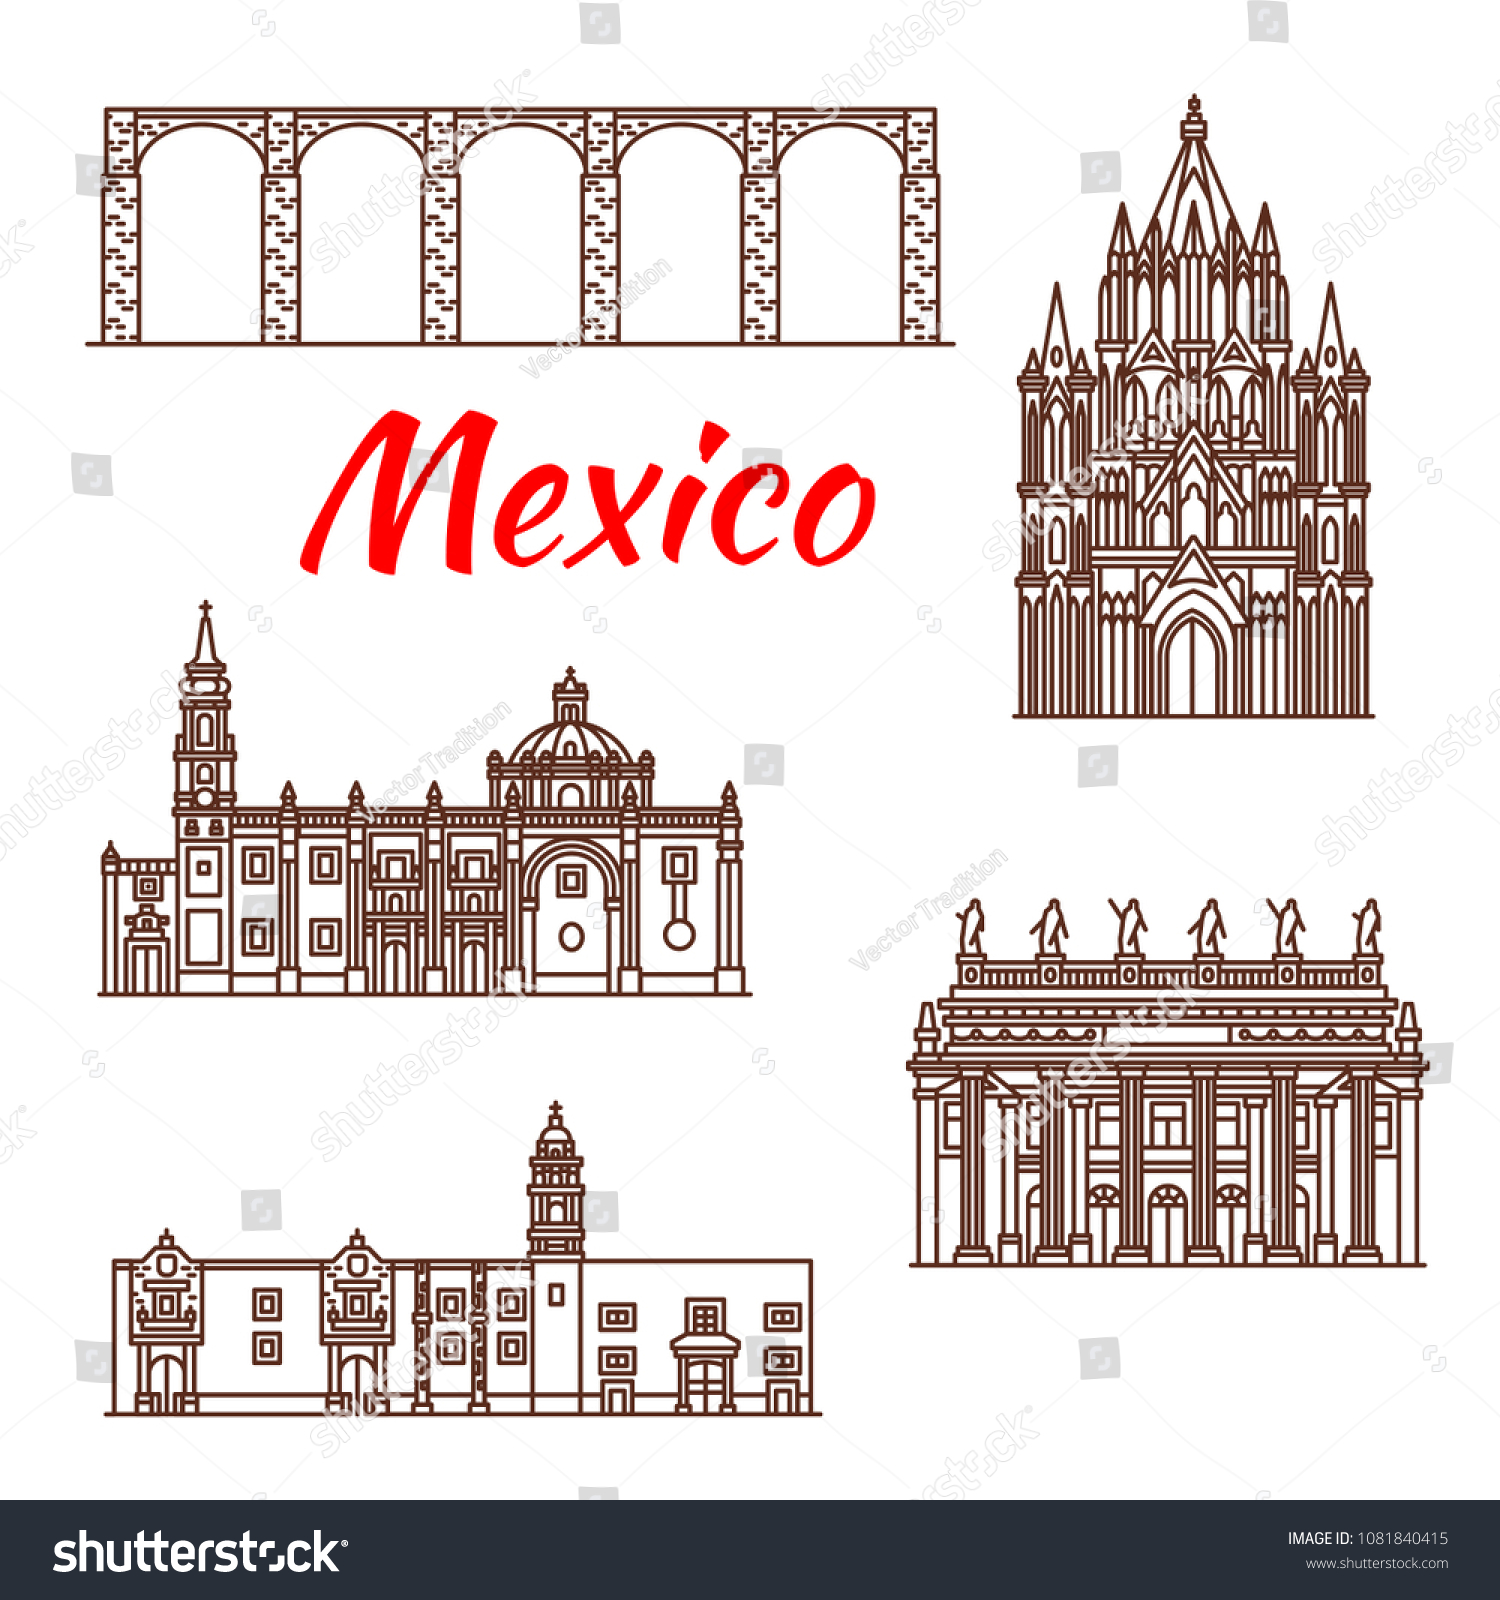 SVG of Travel landmark of Mexico icon set of famous mexican architecture. Aqueduct of Padre Tembleque, Juarez Theater and St Clara Church, Temple of Santa Rosa de Viterbo and Parish Church of San Miguel svg